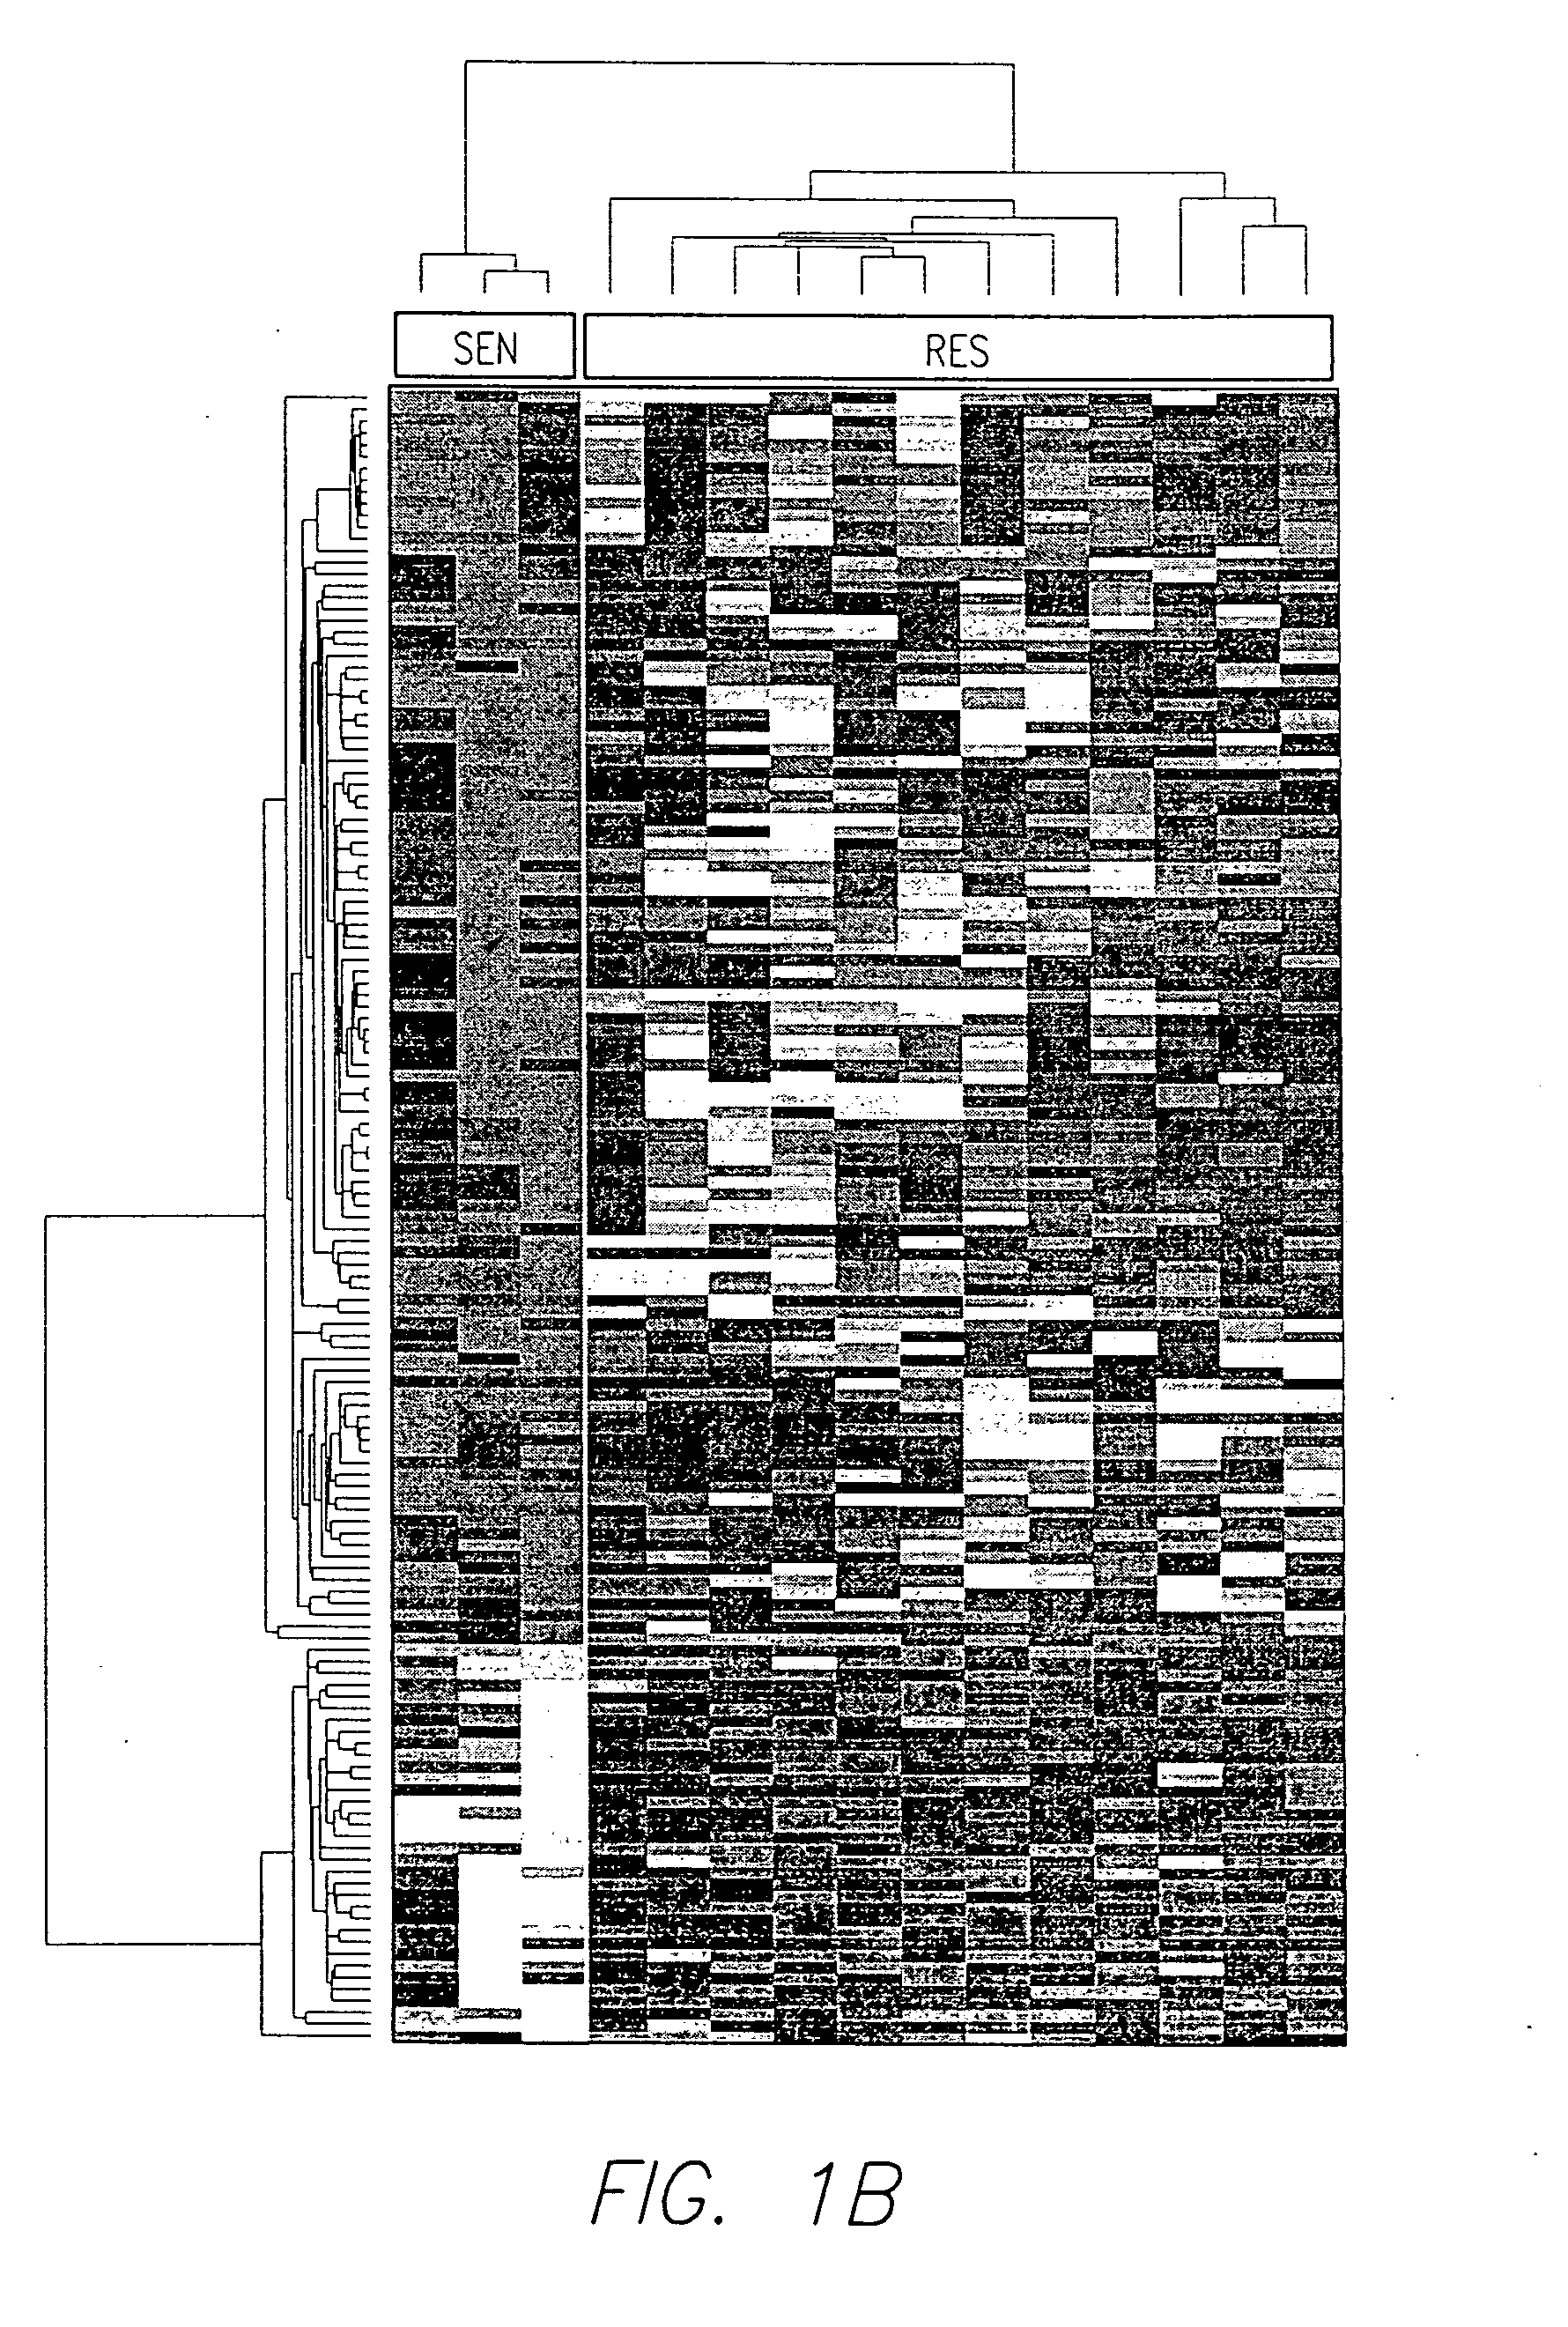 Protein modulators of resistance to alkylating agents